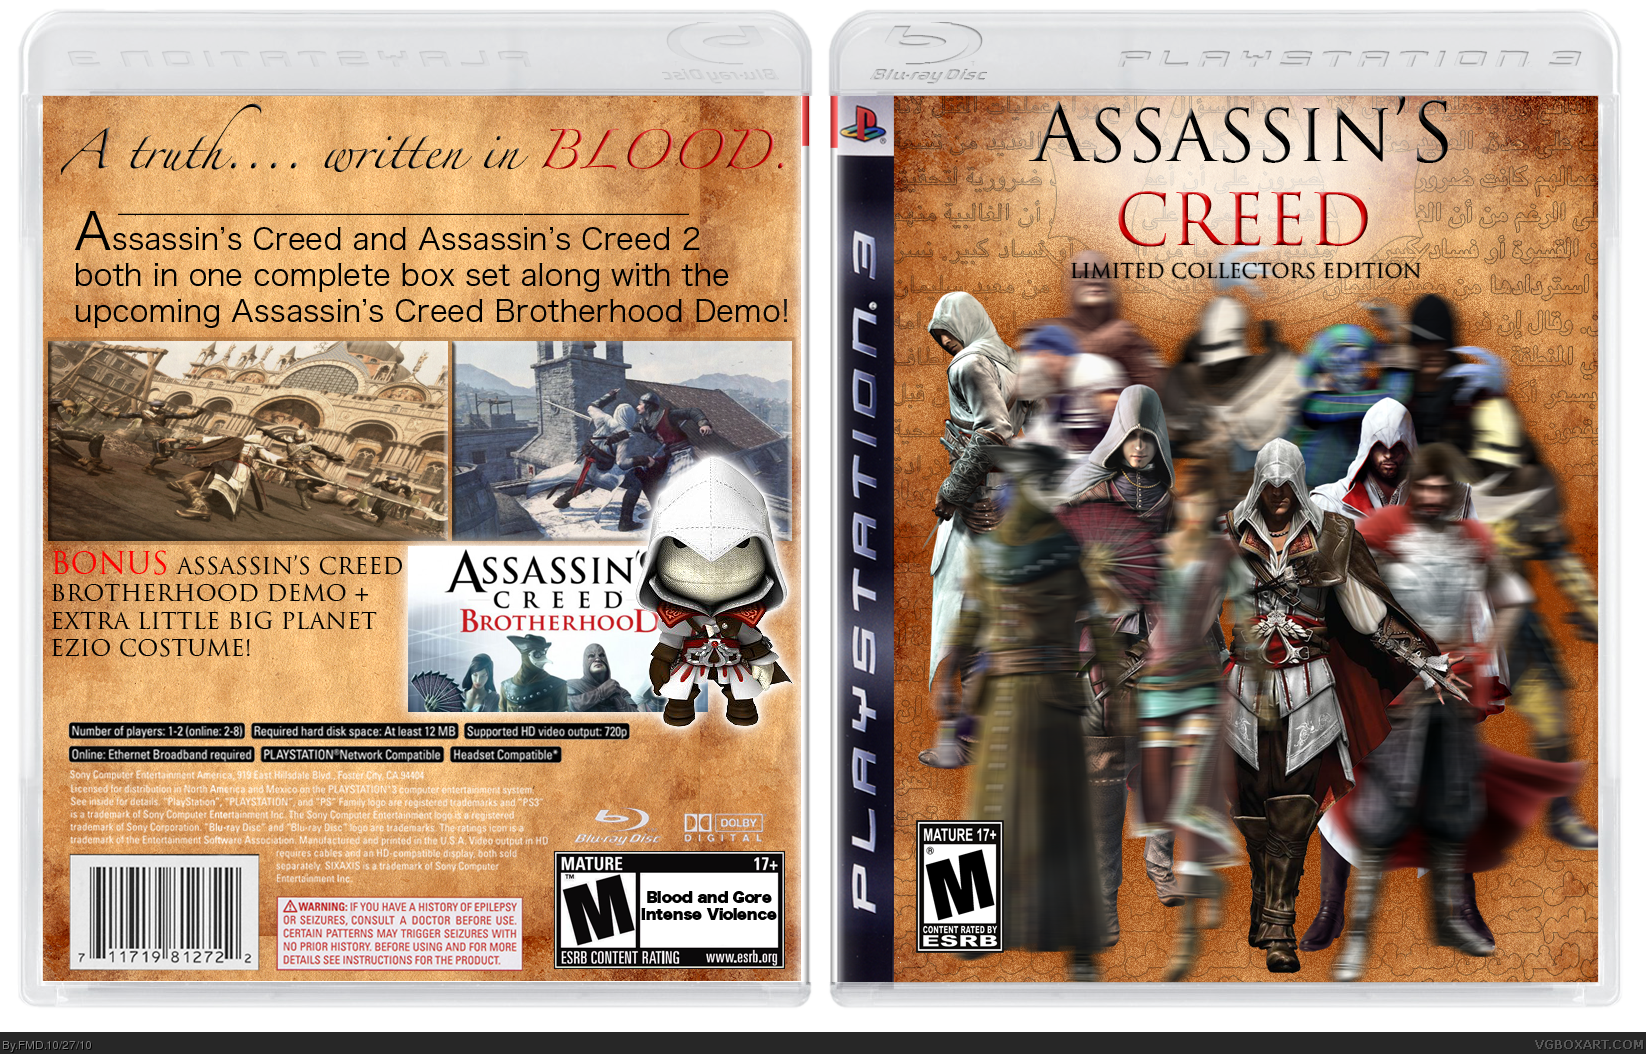 Assassin's Creed: Limited Collectors Edition box cover